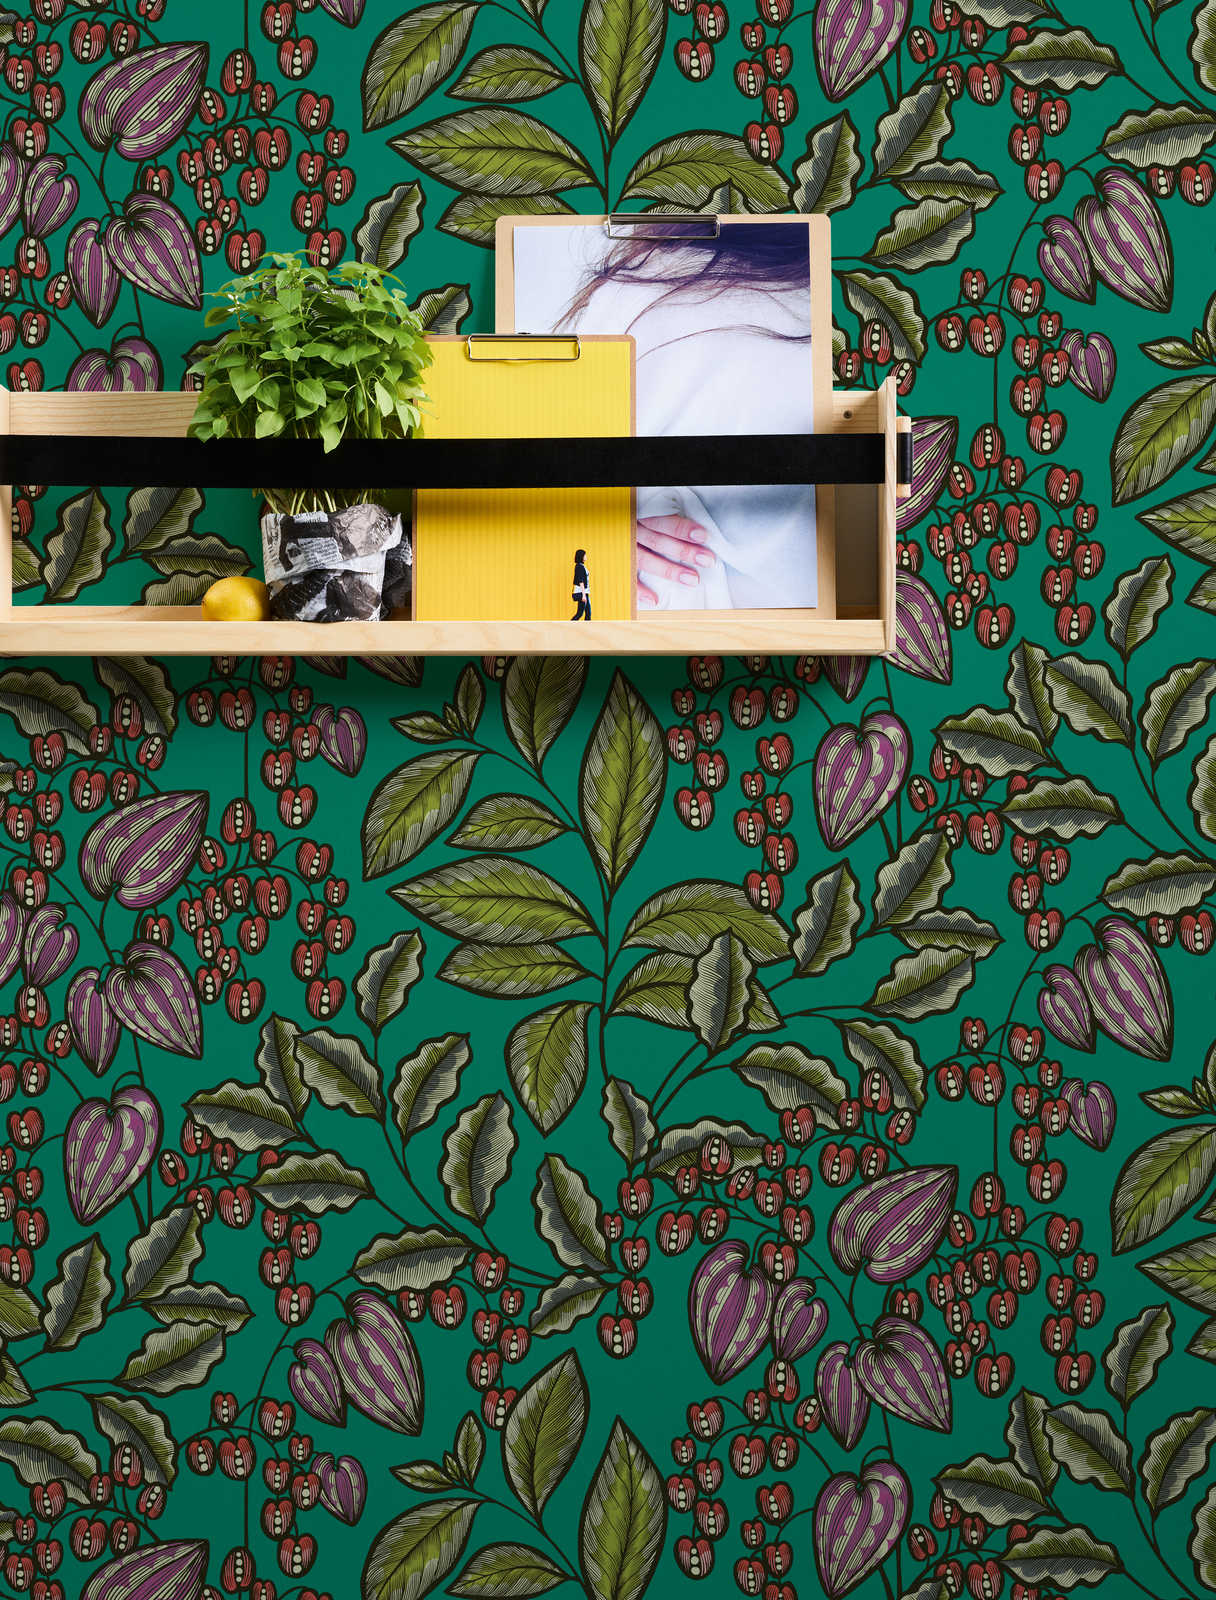             Wallpaper green with leaves motif in Scandi design - green, red, purple
        